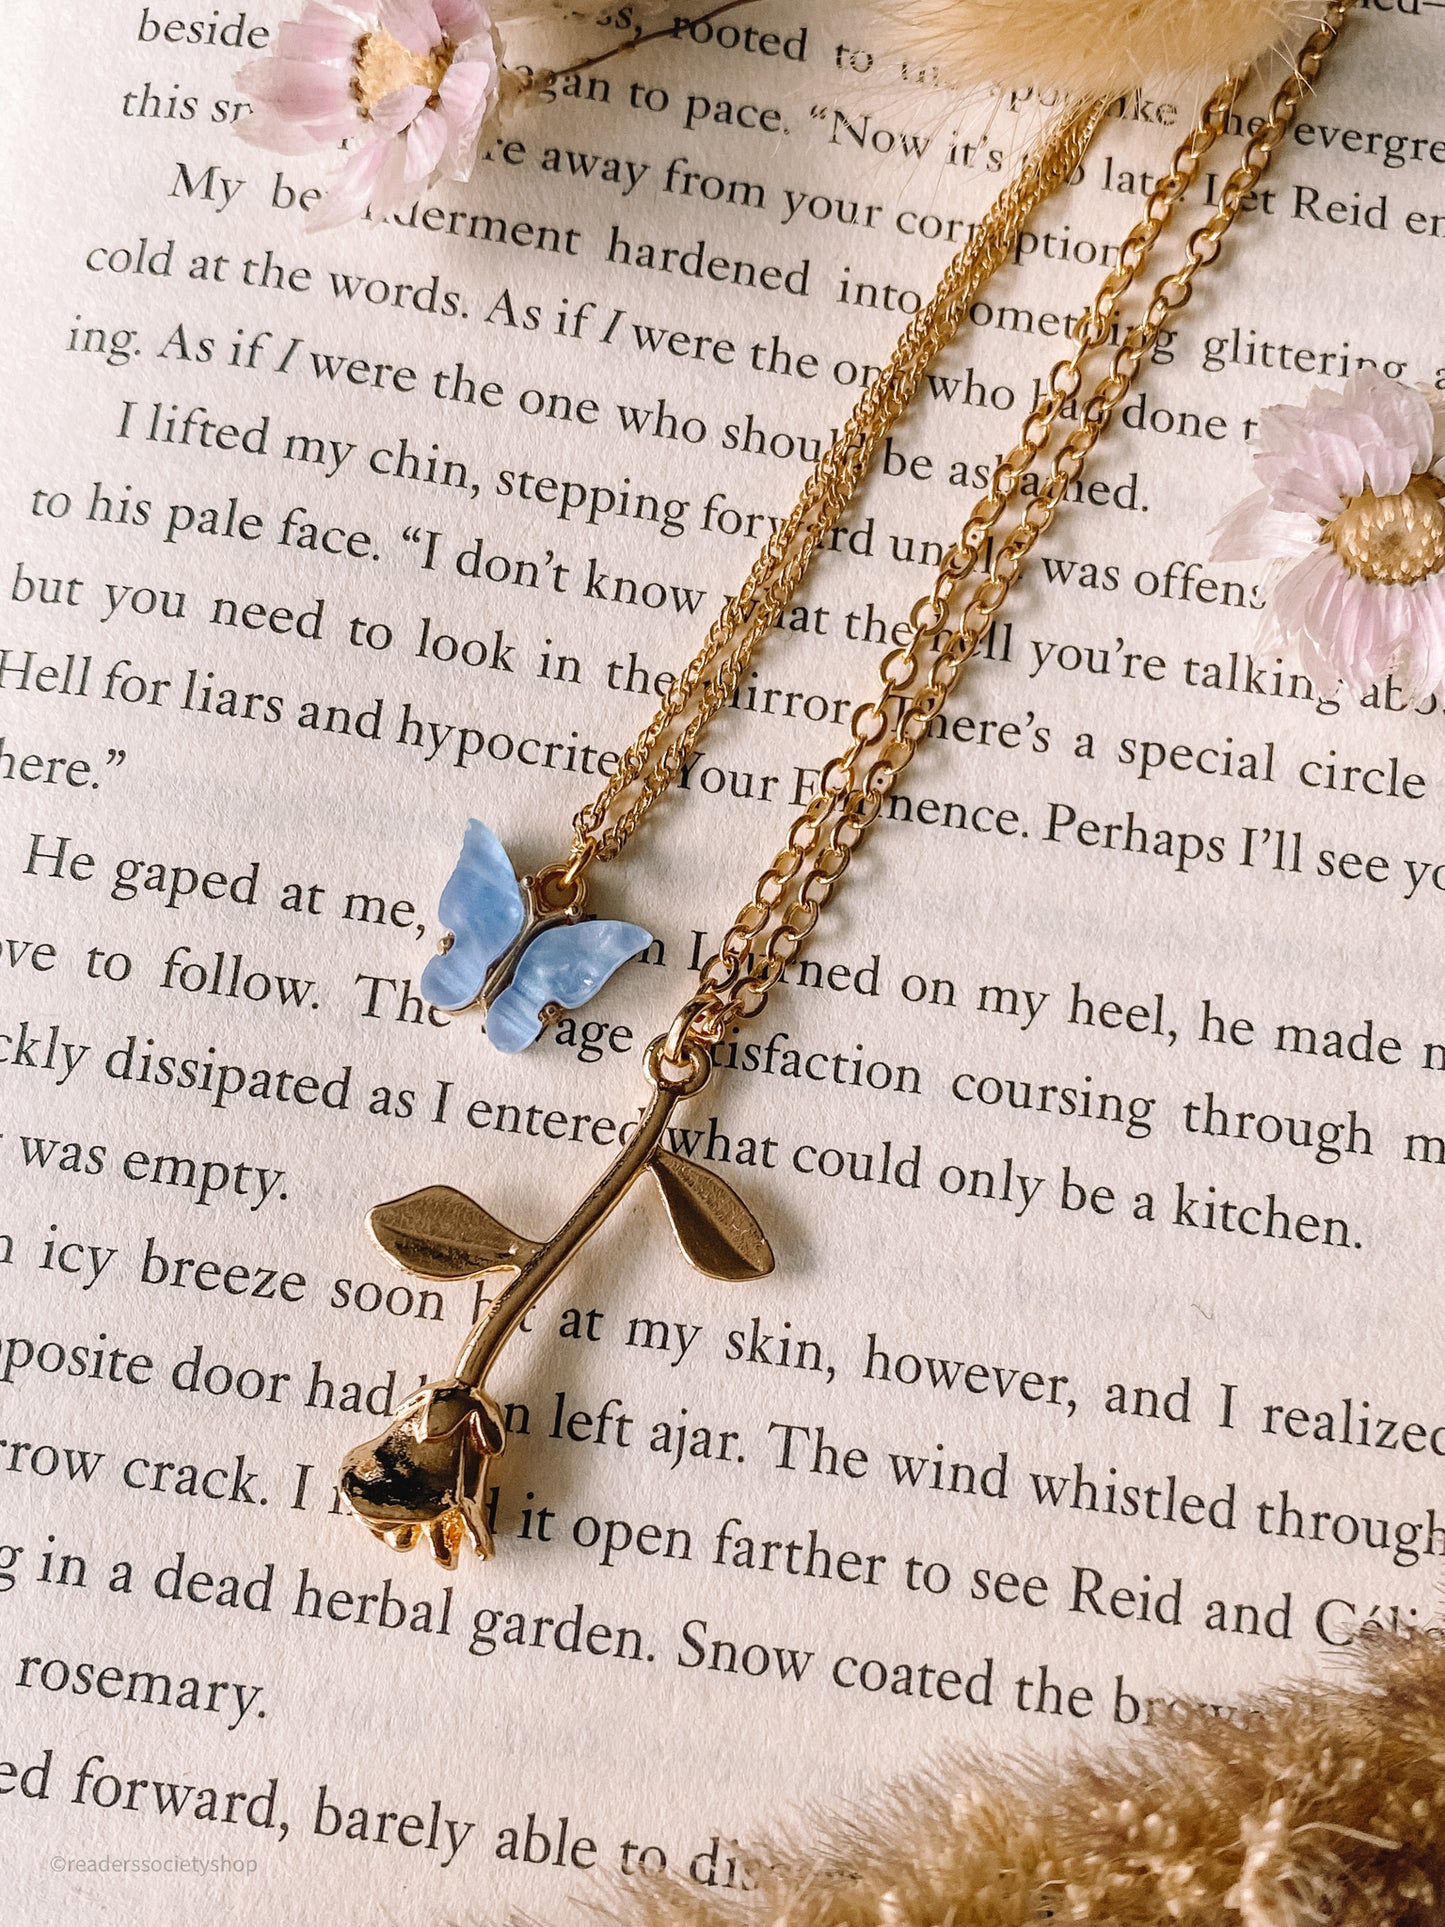 Spring Butterfly Necklace